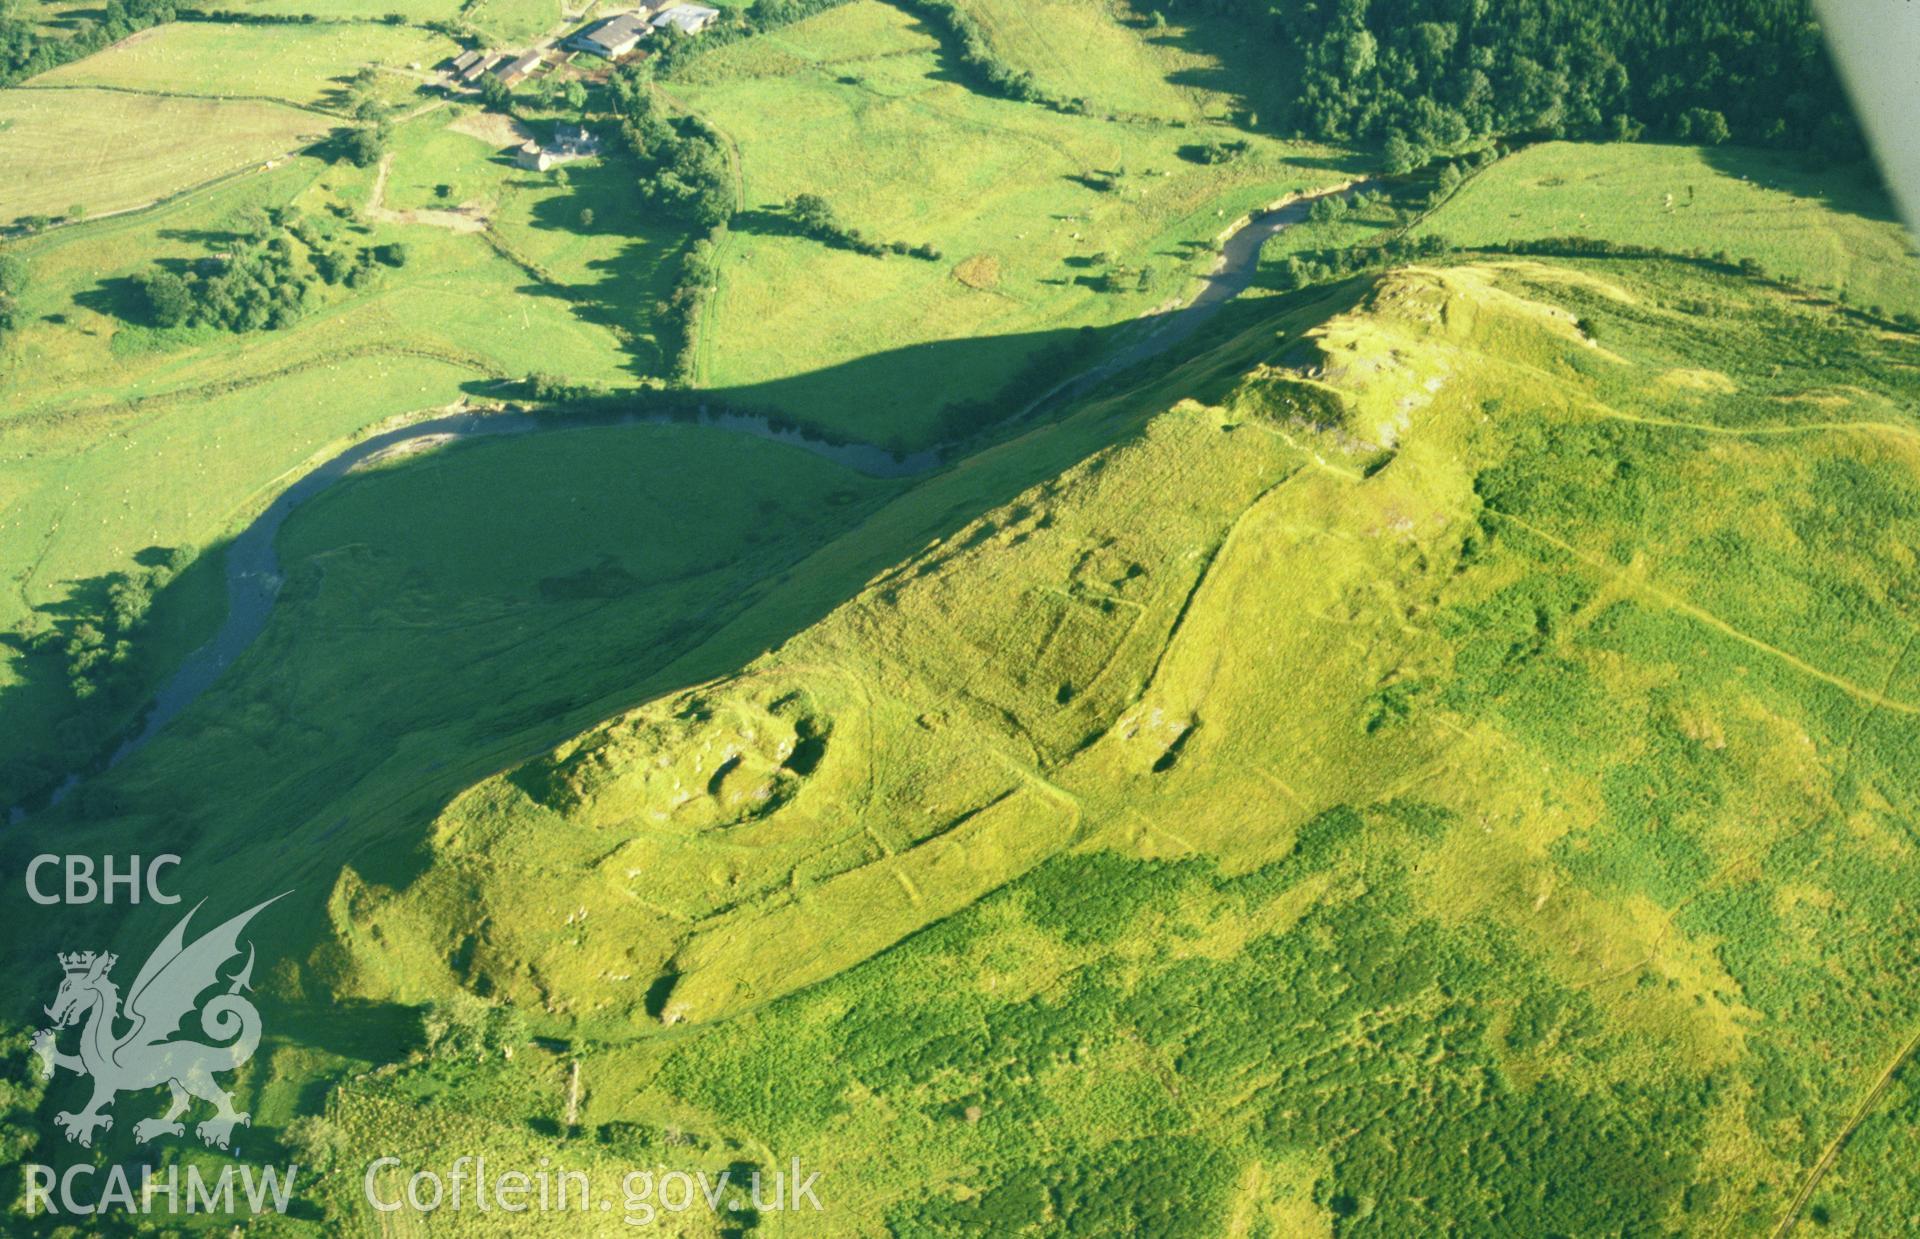 RCAHMW colour slide oblique aerial photograph of Cefnllys Castle, Penybont, taken by CR Musson on 02/08/88